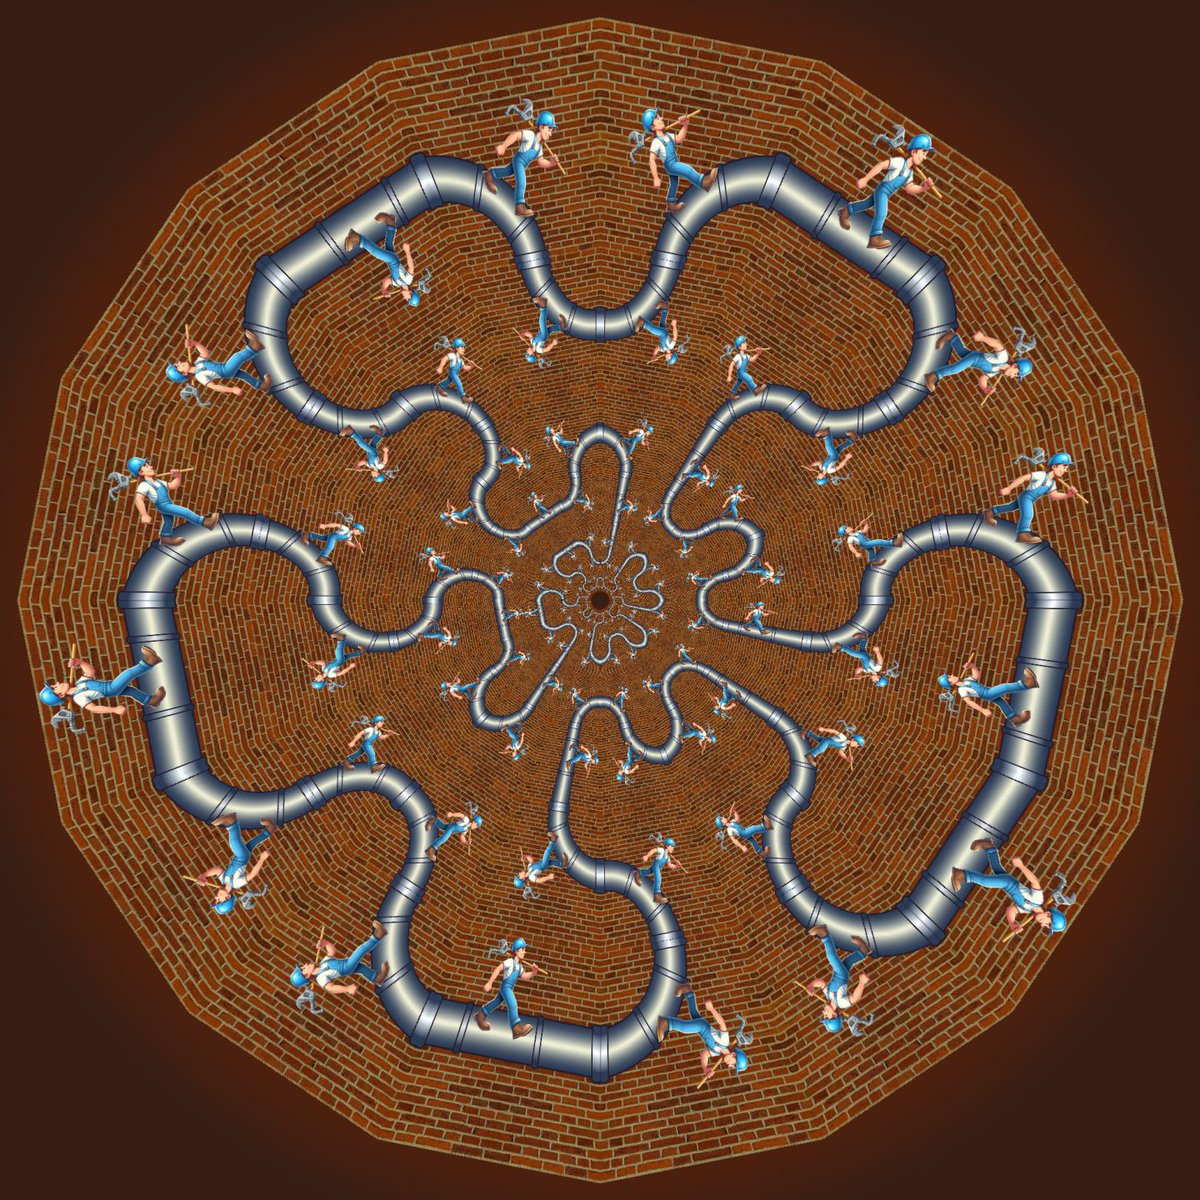 This tessellation is based on a closed curve consisting of two space-filling Hilbert curves connected together, and transformed into a circle. The plumber is created by #CoPilot. #mcescher #escherart #escher #mathart #digitalart #hilbert #curve #path #fractal #circle #Tissellator